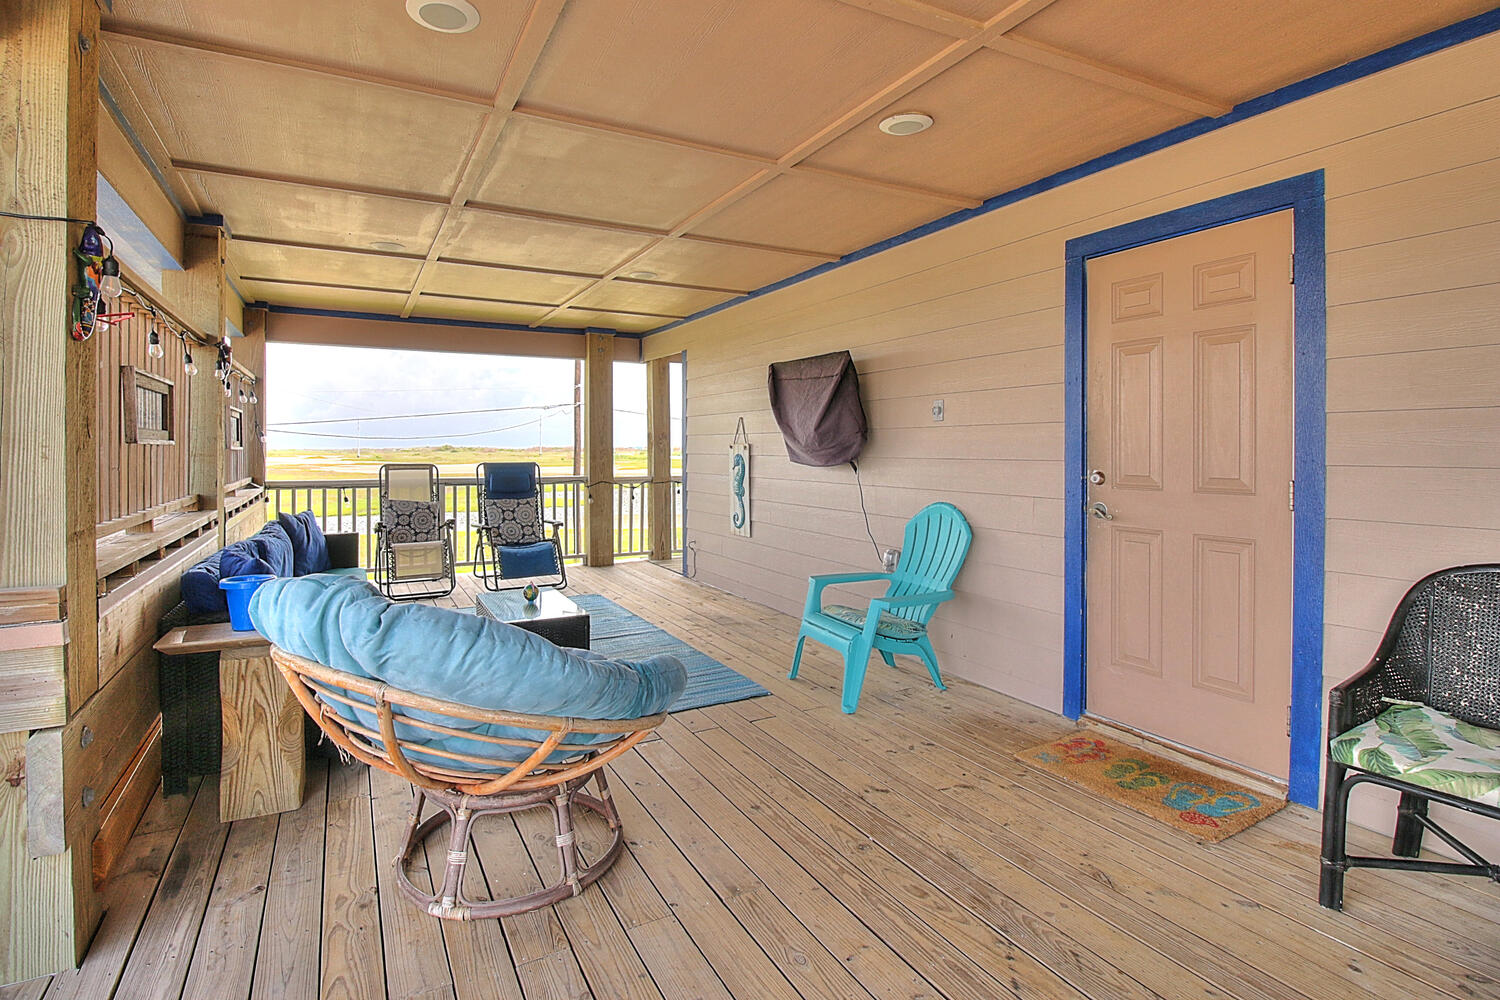 Covered deck with outdoor seating, and TV